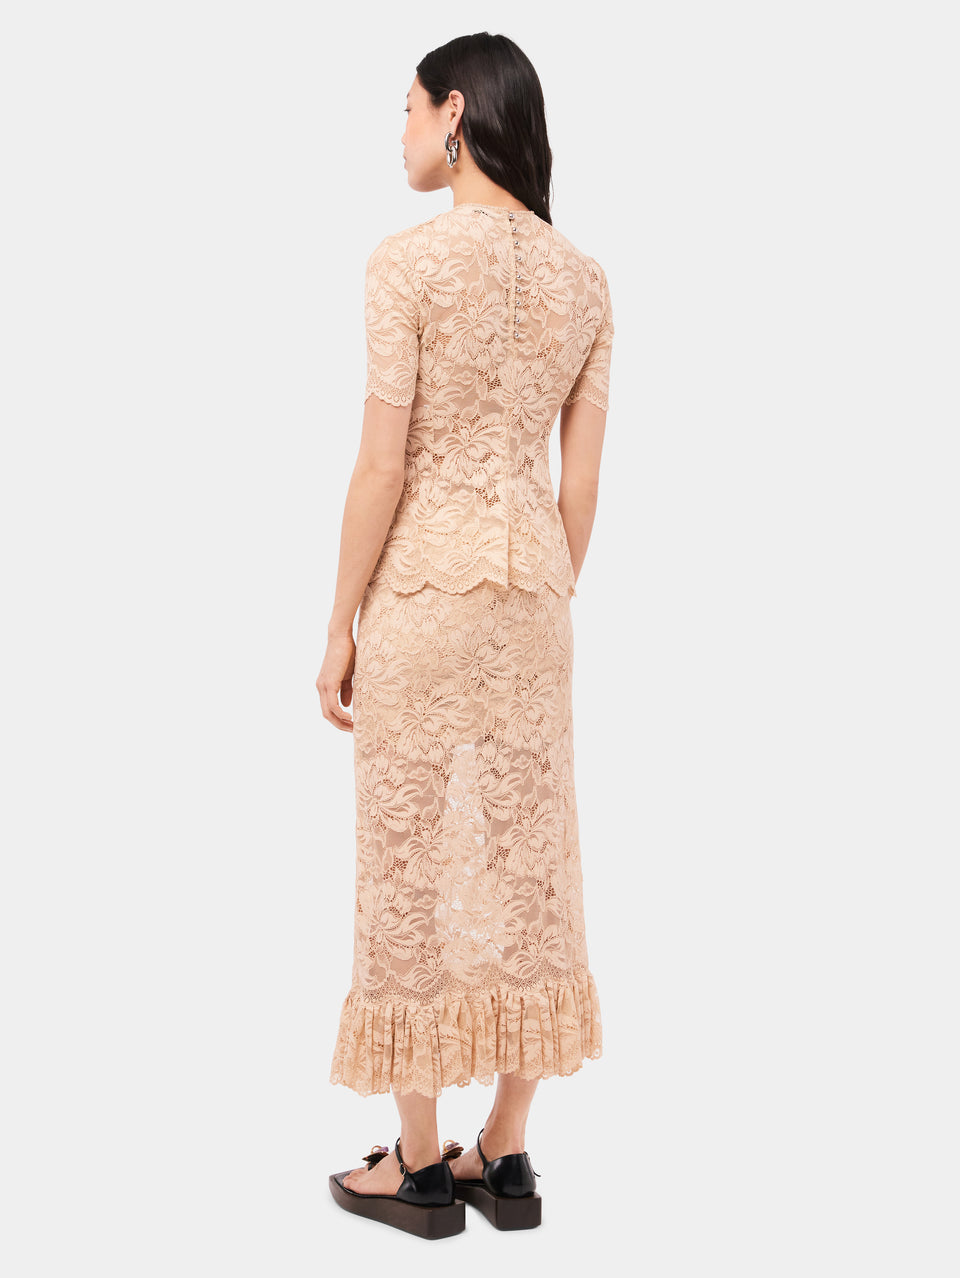 Long raffia colored skirt in lace